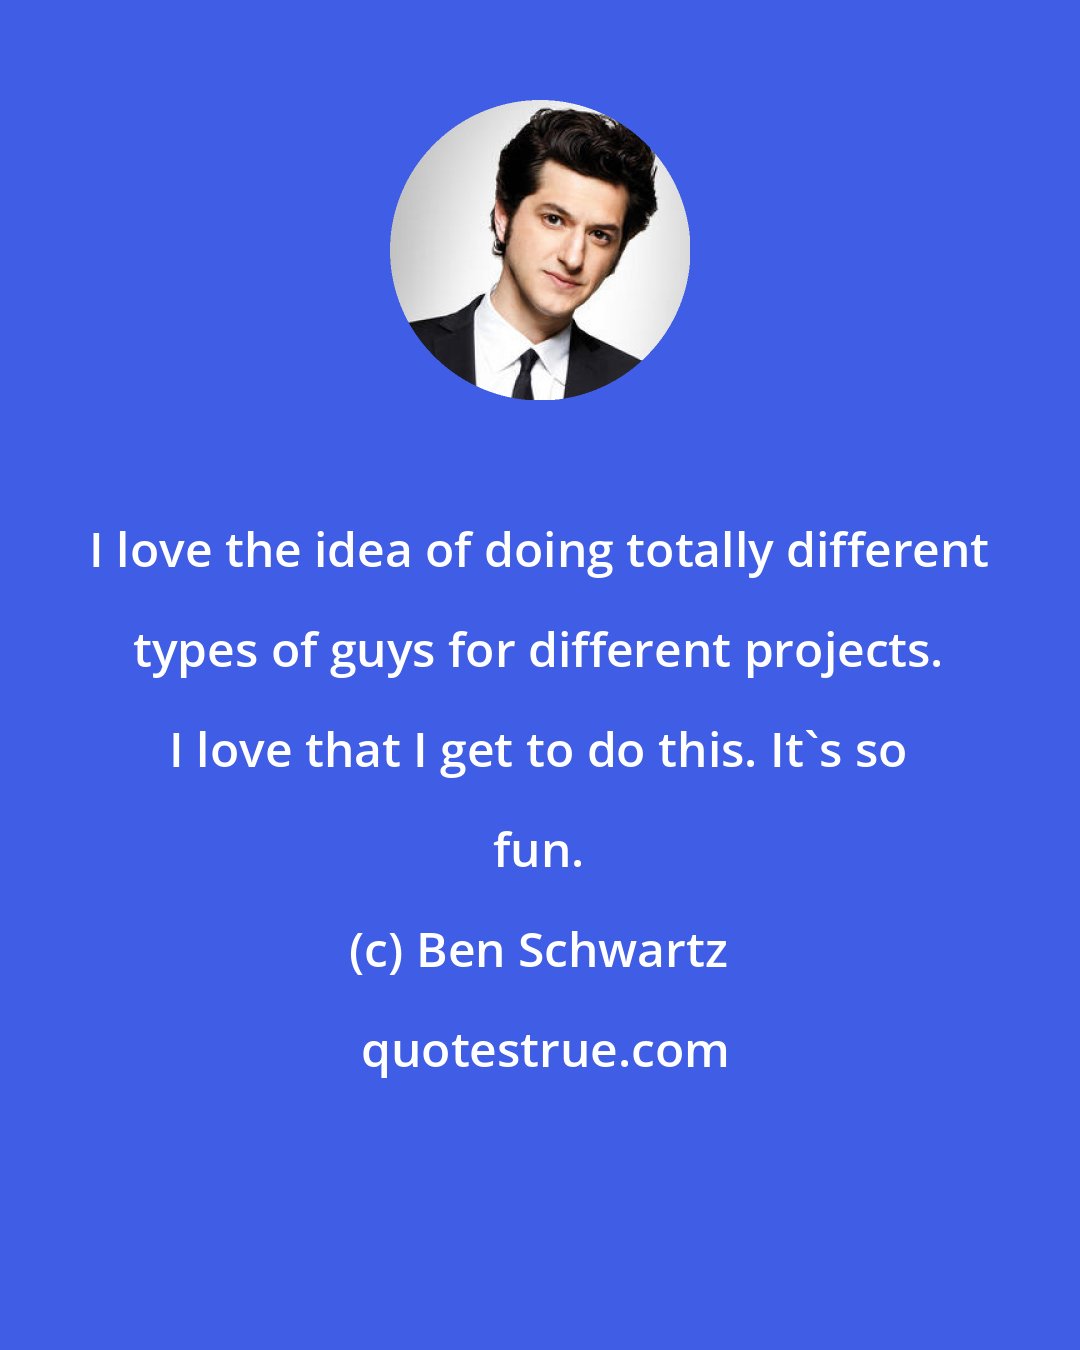 Ben Schwartz: I love the idea of doing totally different types of guys for different projects. I love that I get to do this. It's so fun.